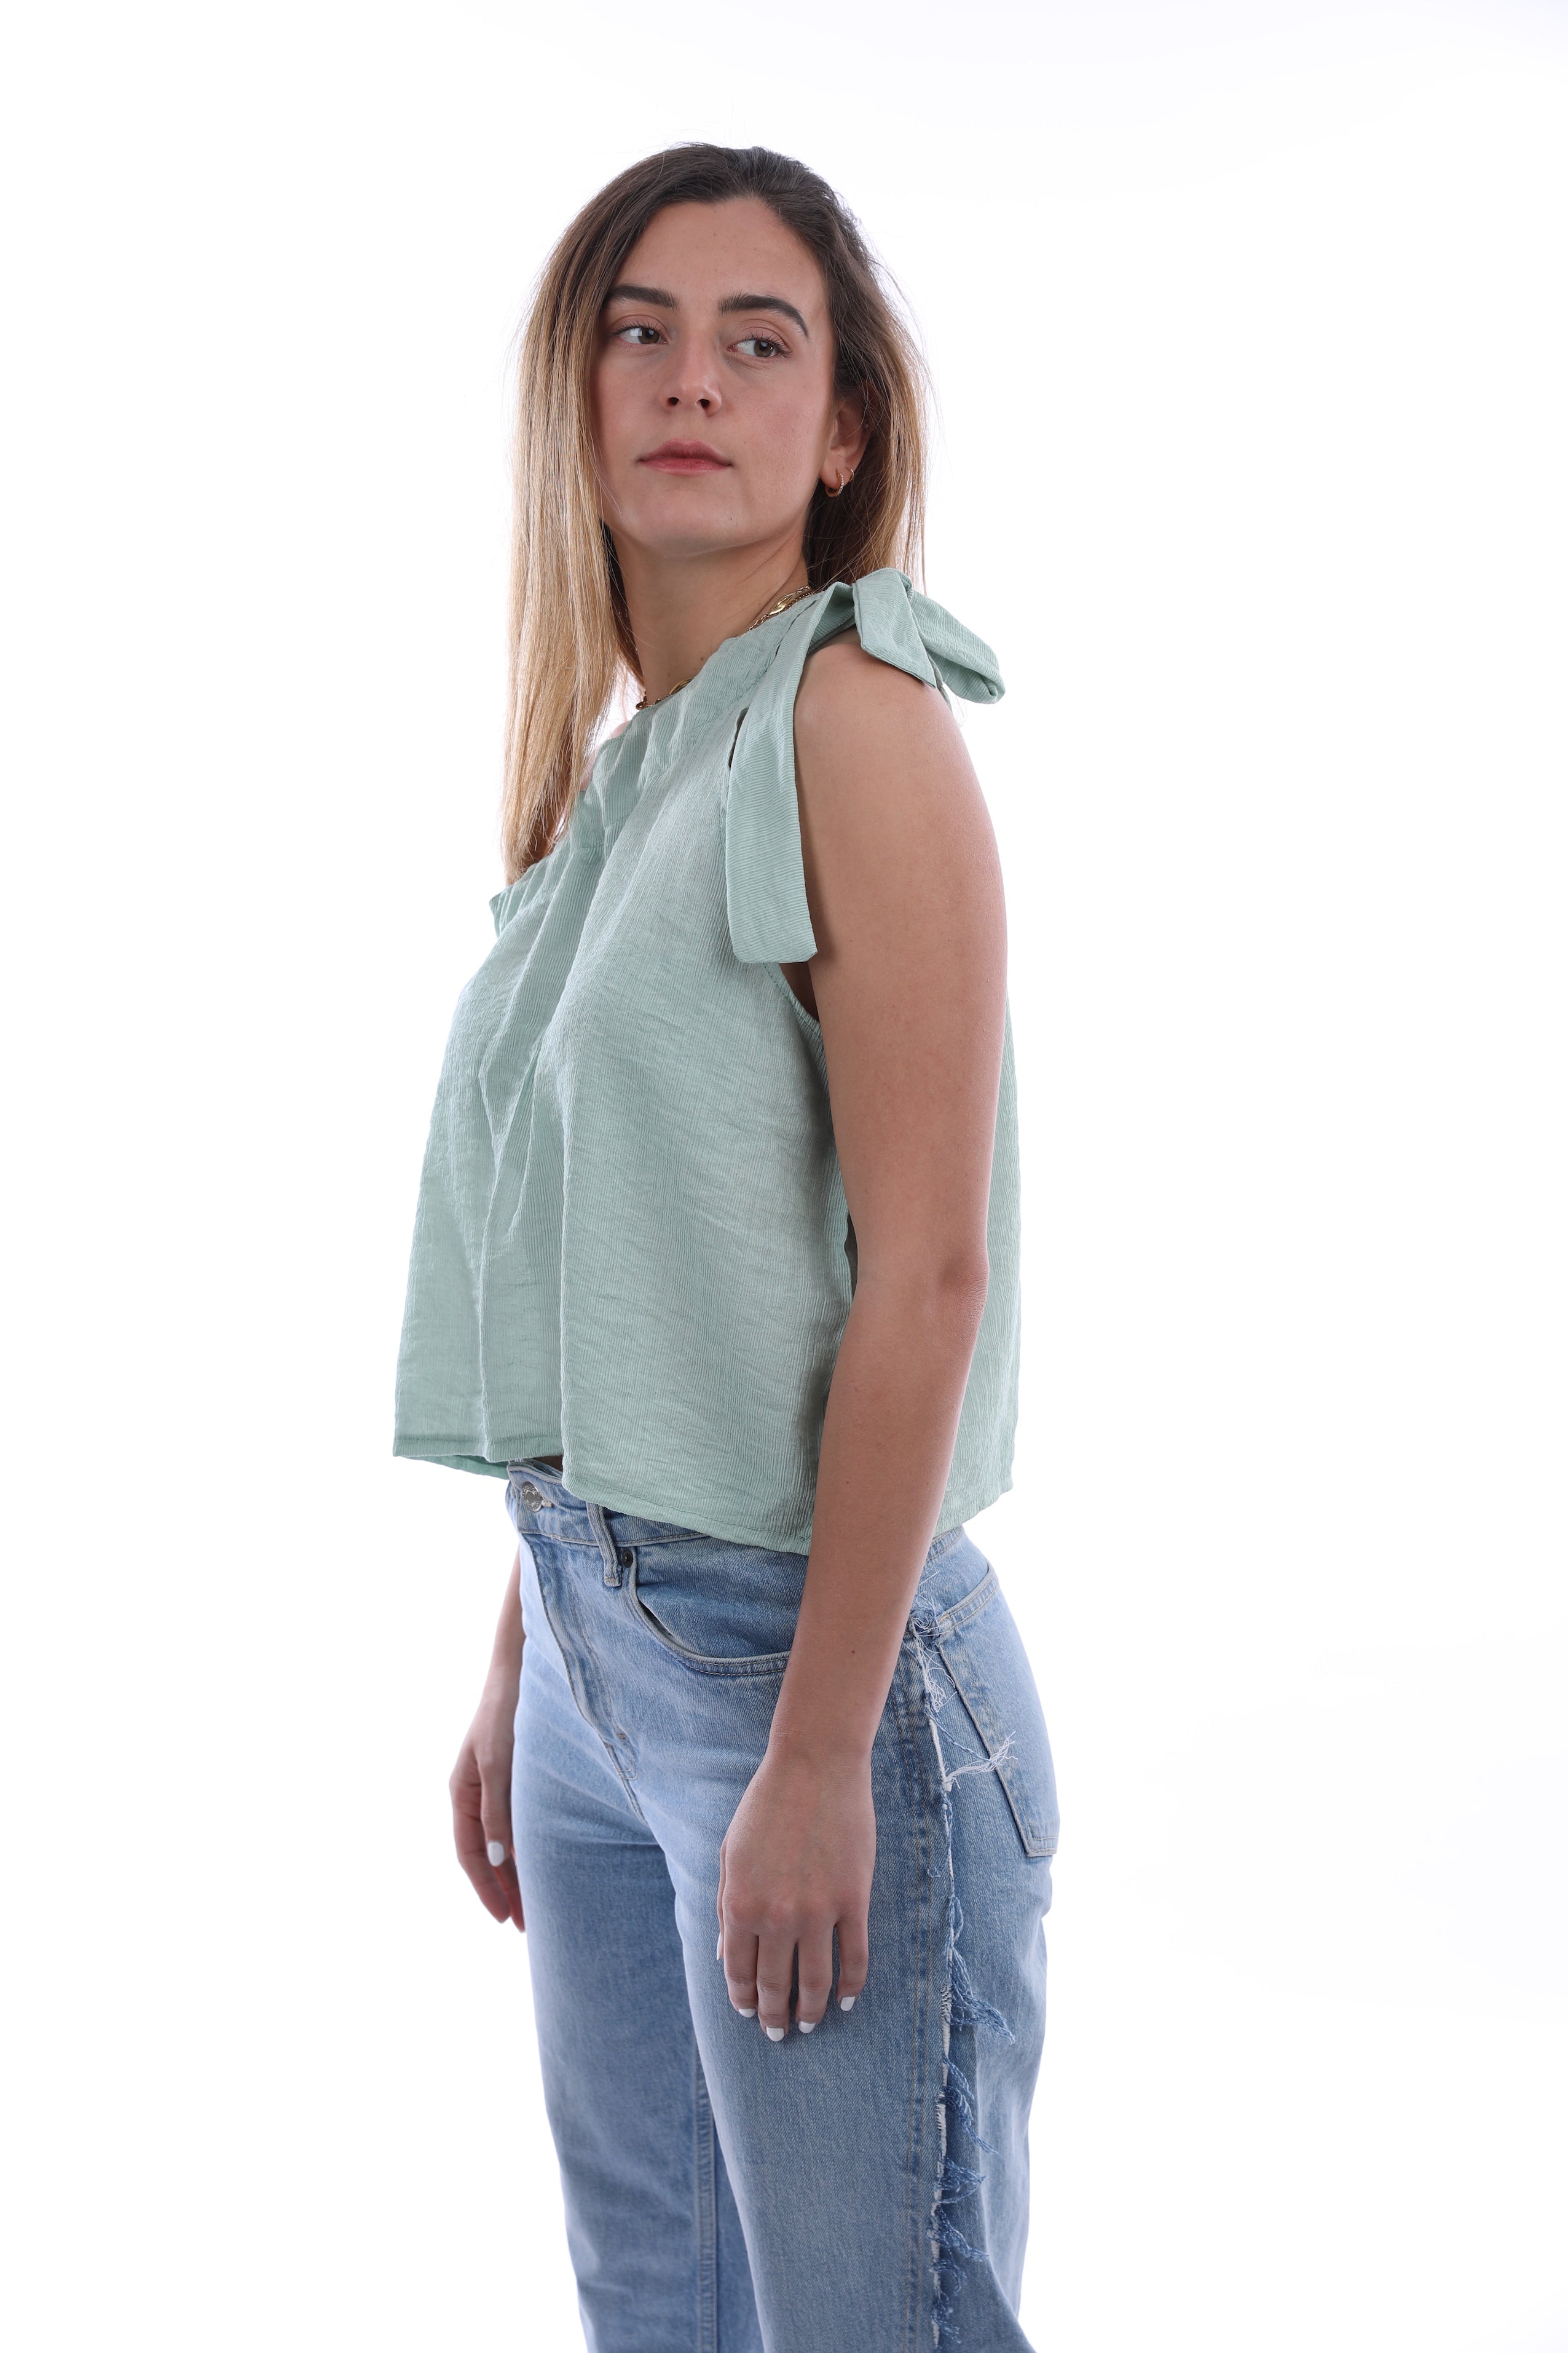 Rise top in turquoise